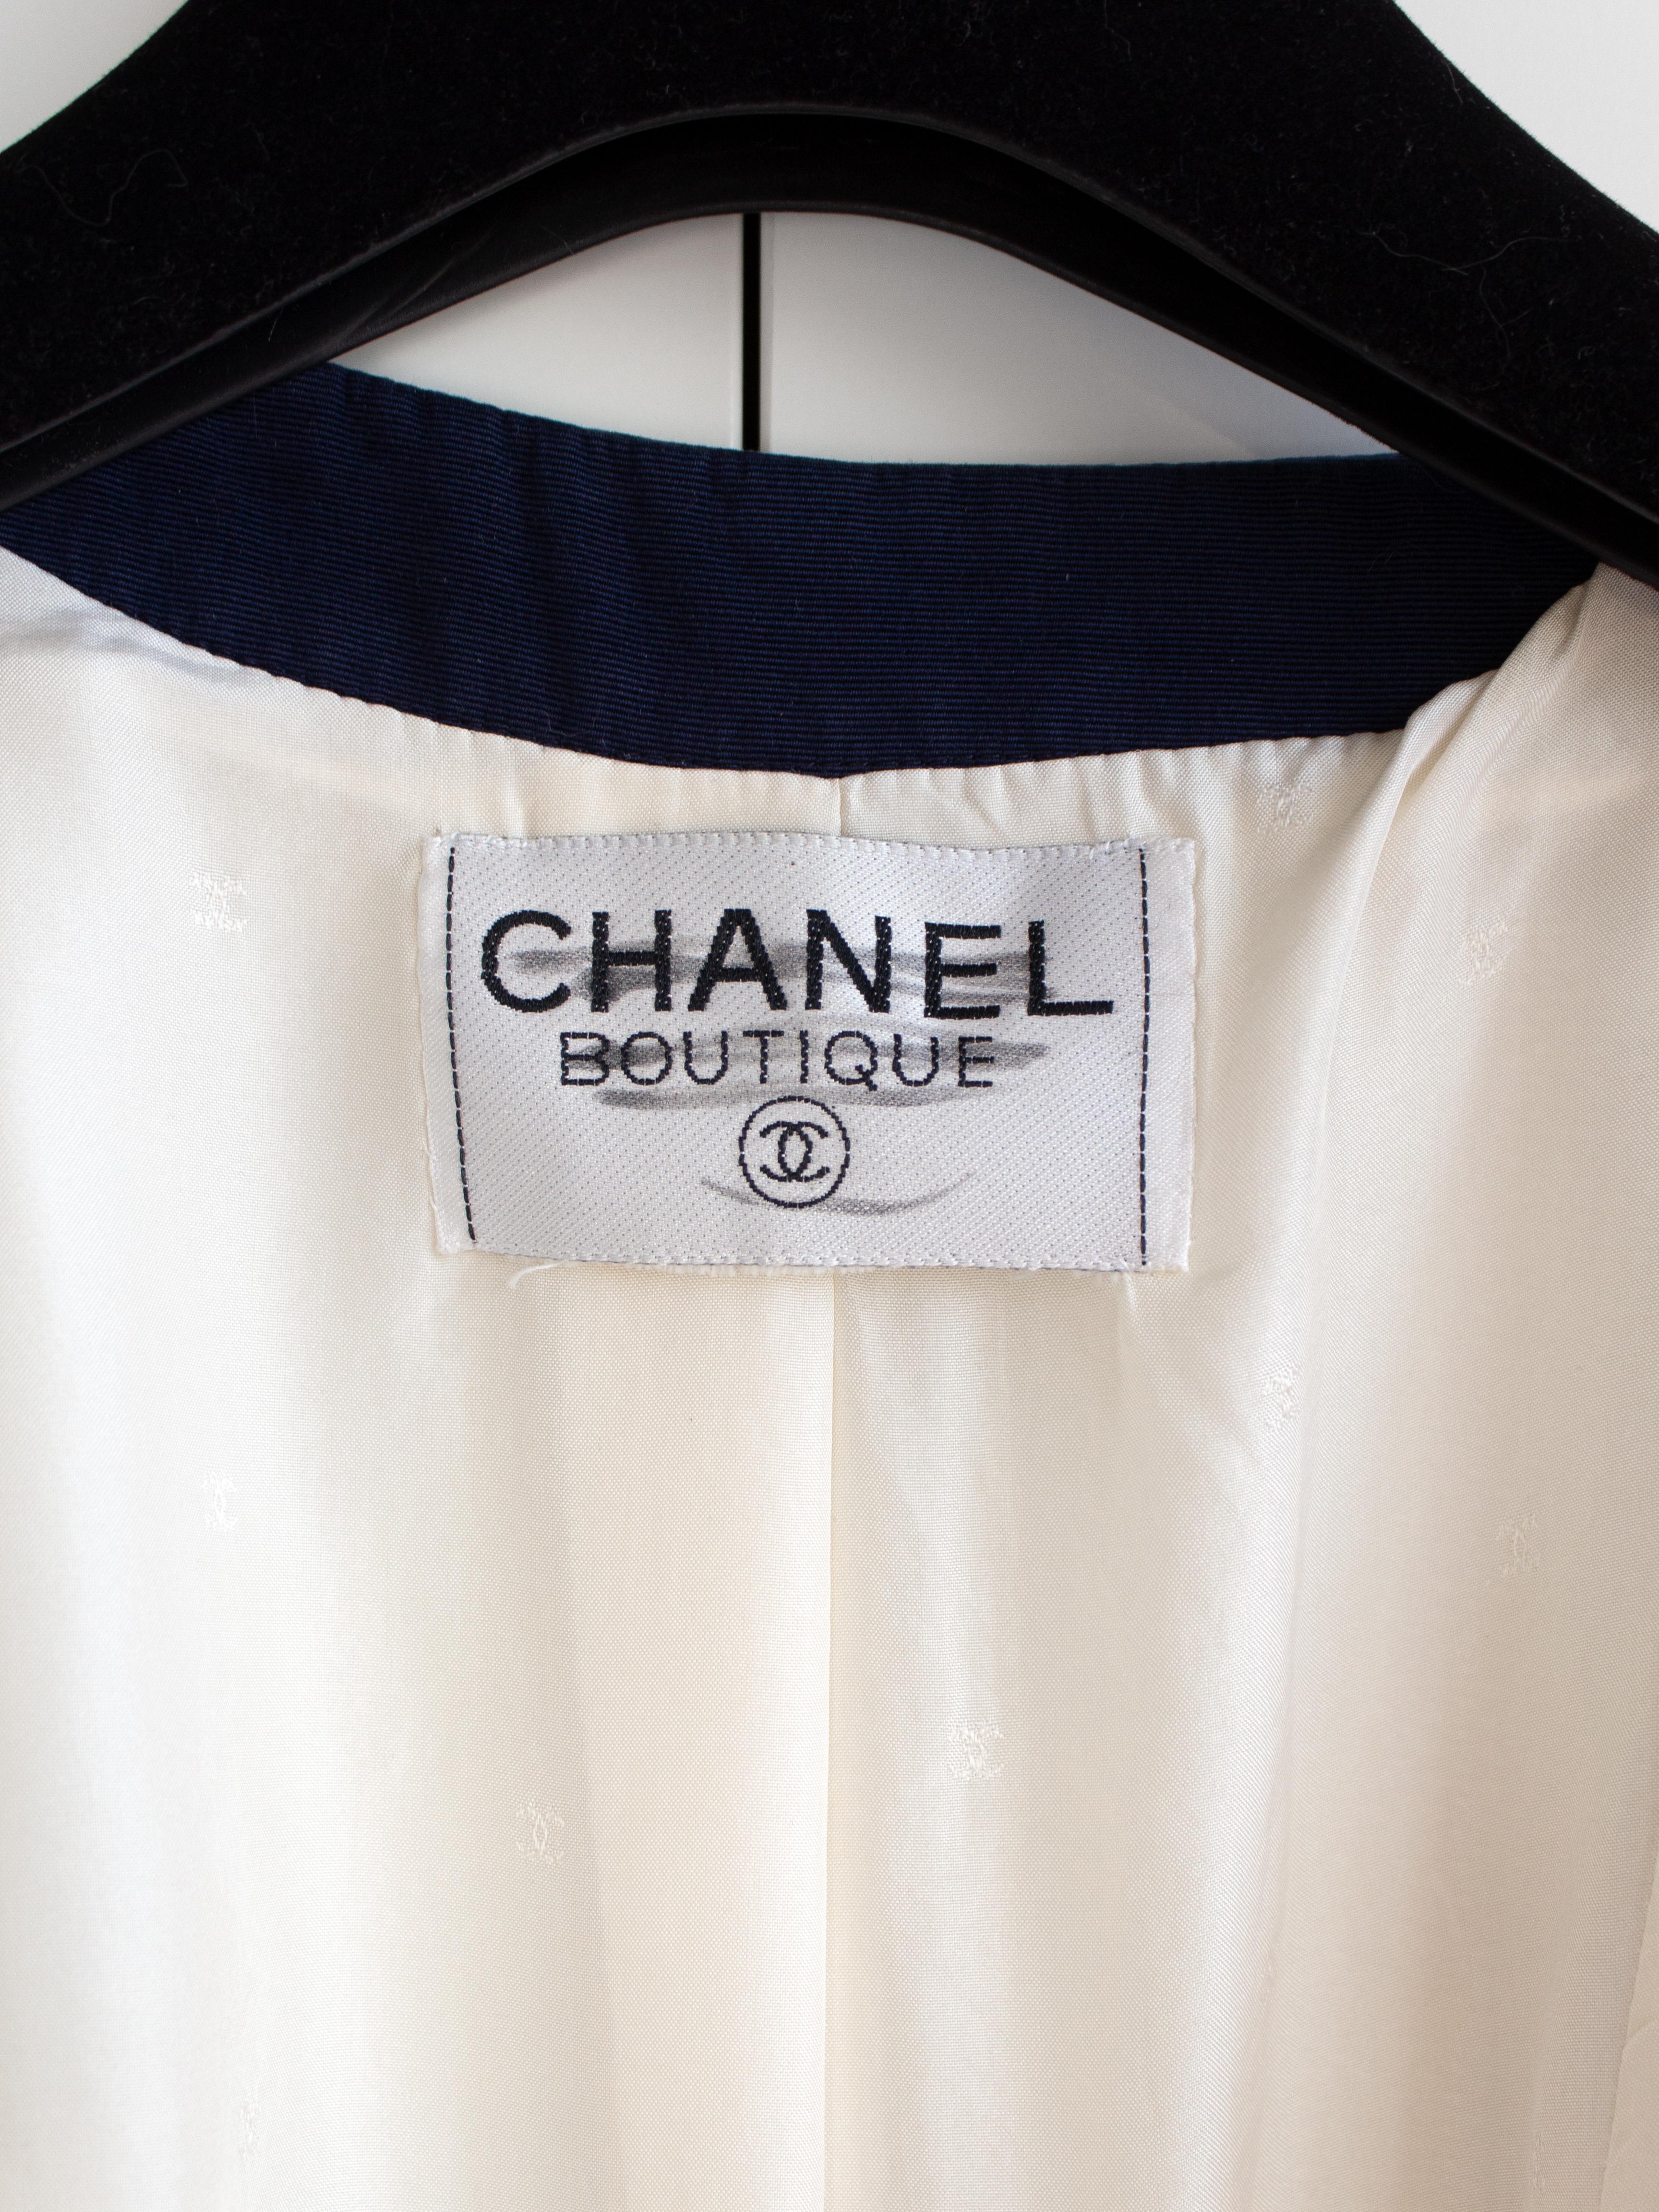 Chanel Vintage S/S 1992 Runway White Navy Lucite Gold Camellia Cotton Jacket 8